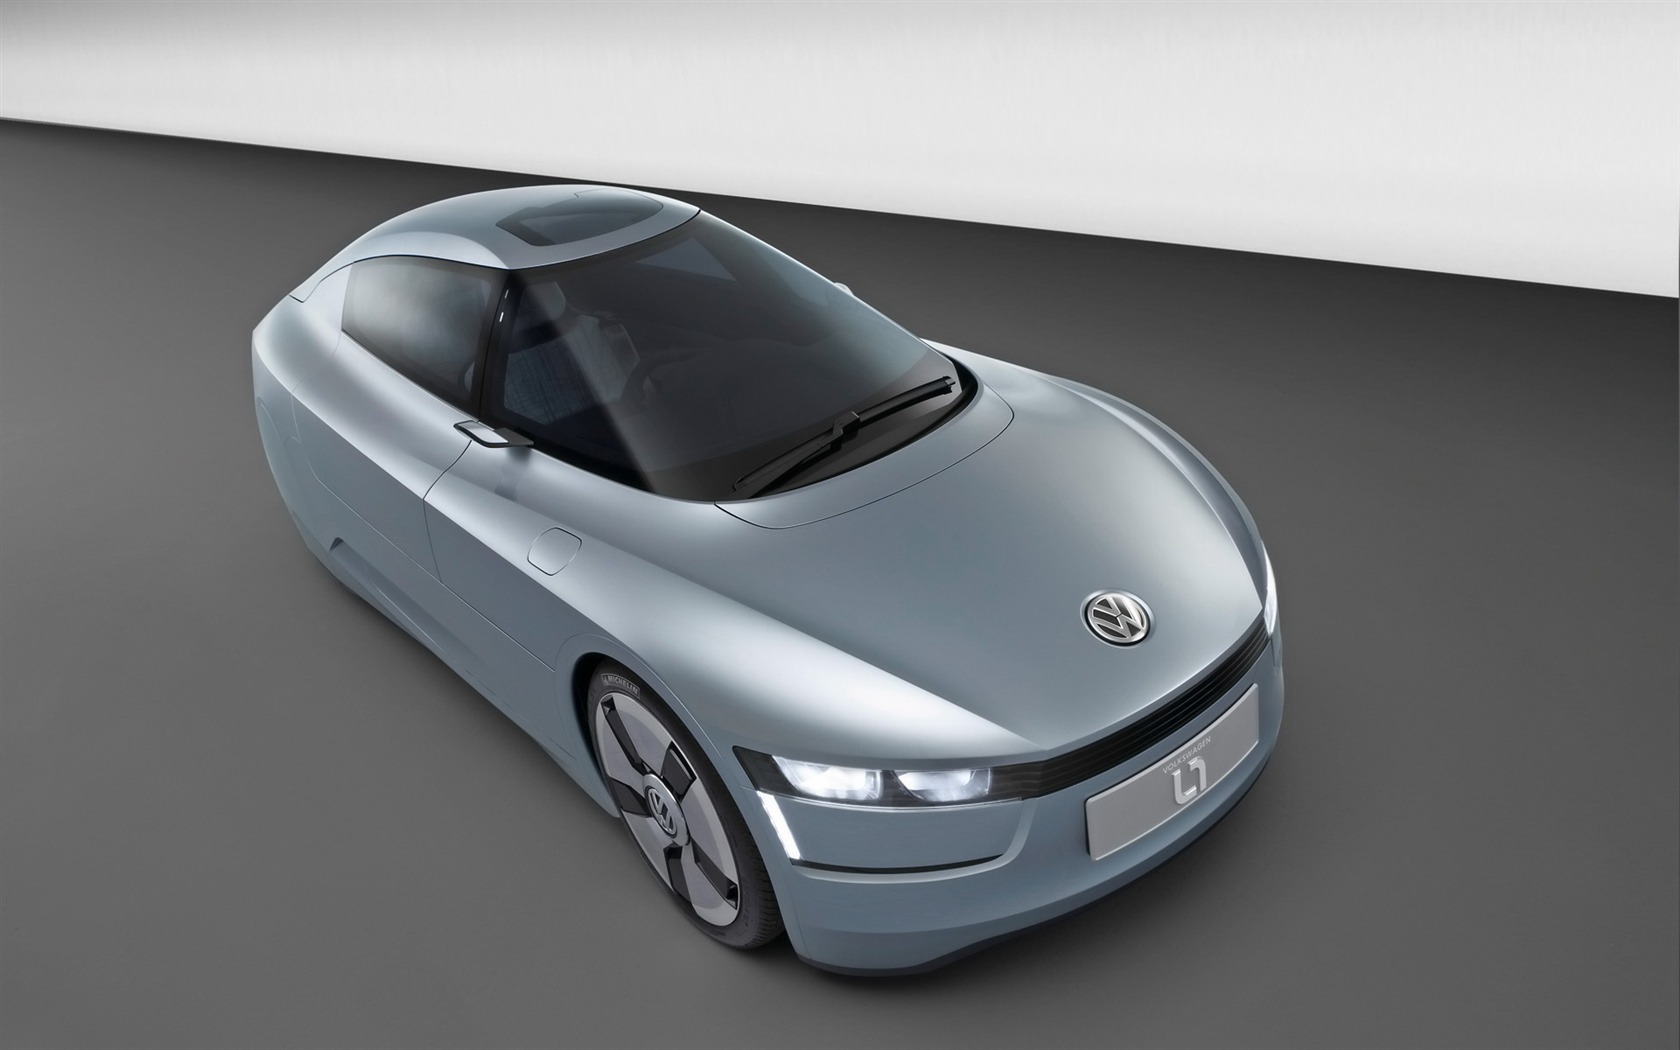 Volkswagen L1 Tapety Concept Car #21 - 1680x1050